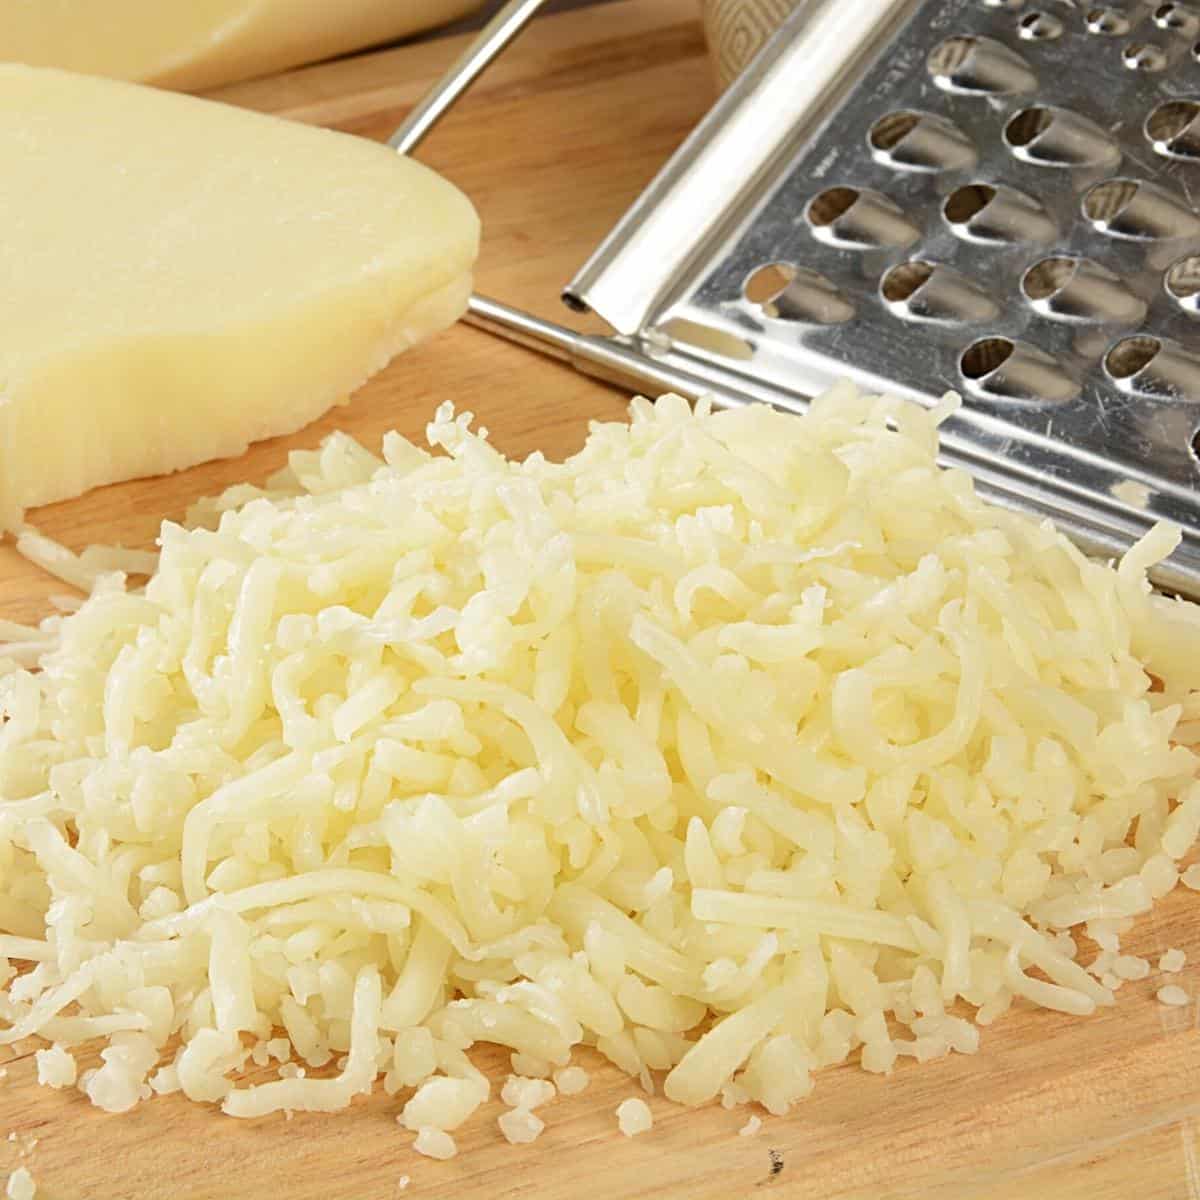 Grated cheese on a board.